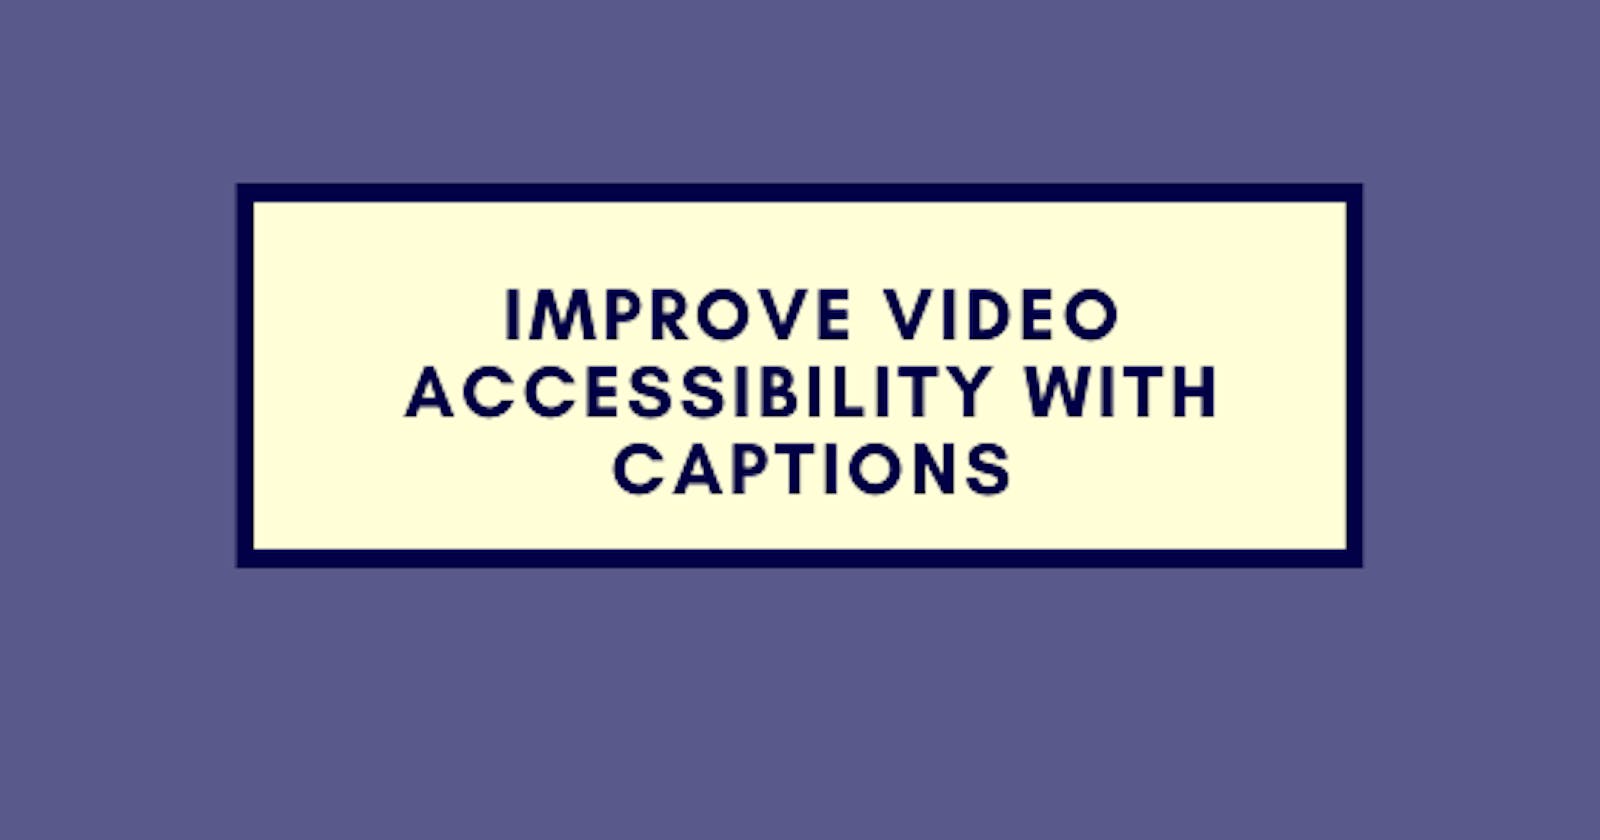 Improve Video Accessibility with Captions